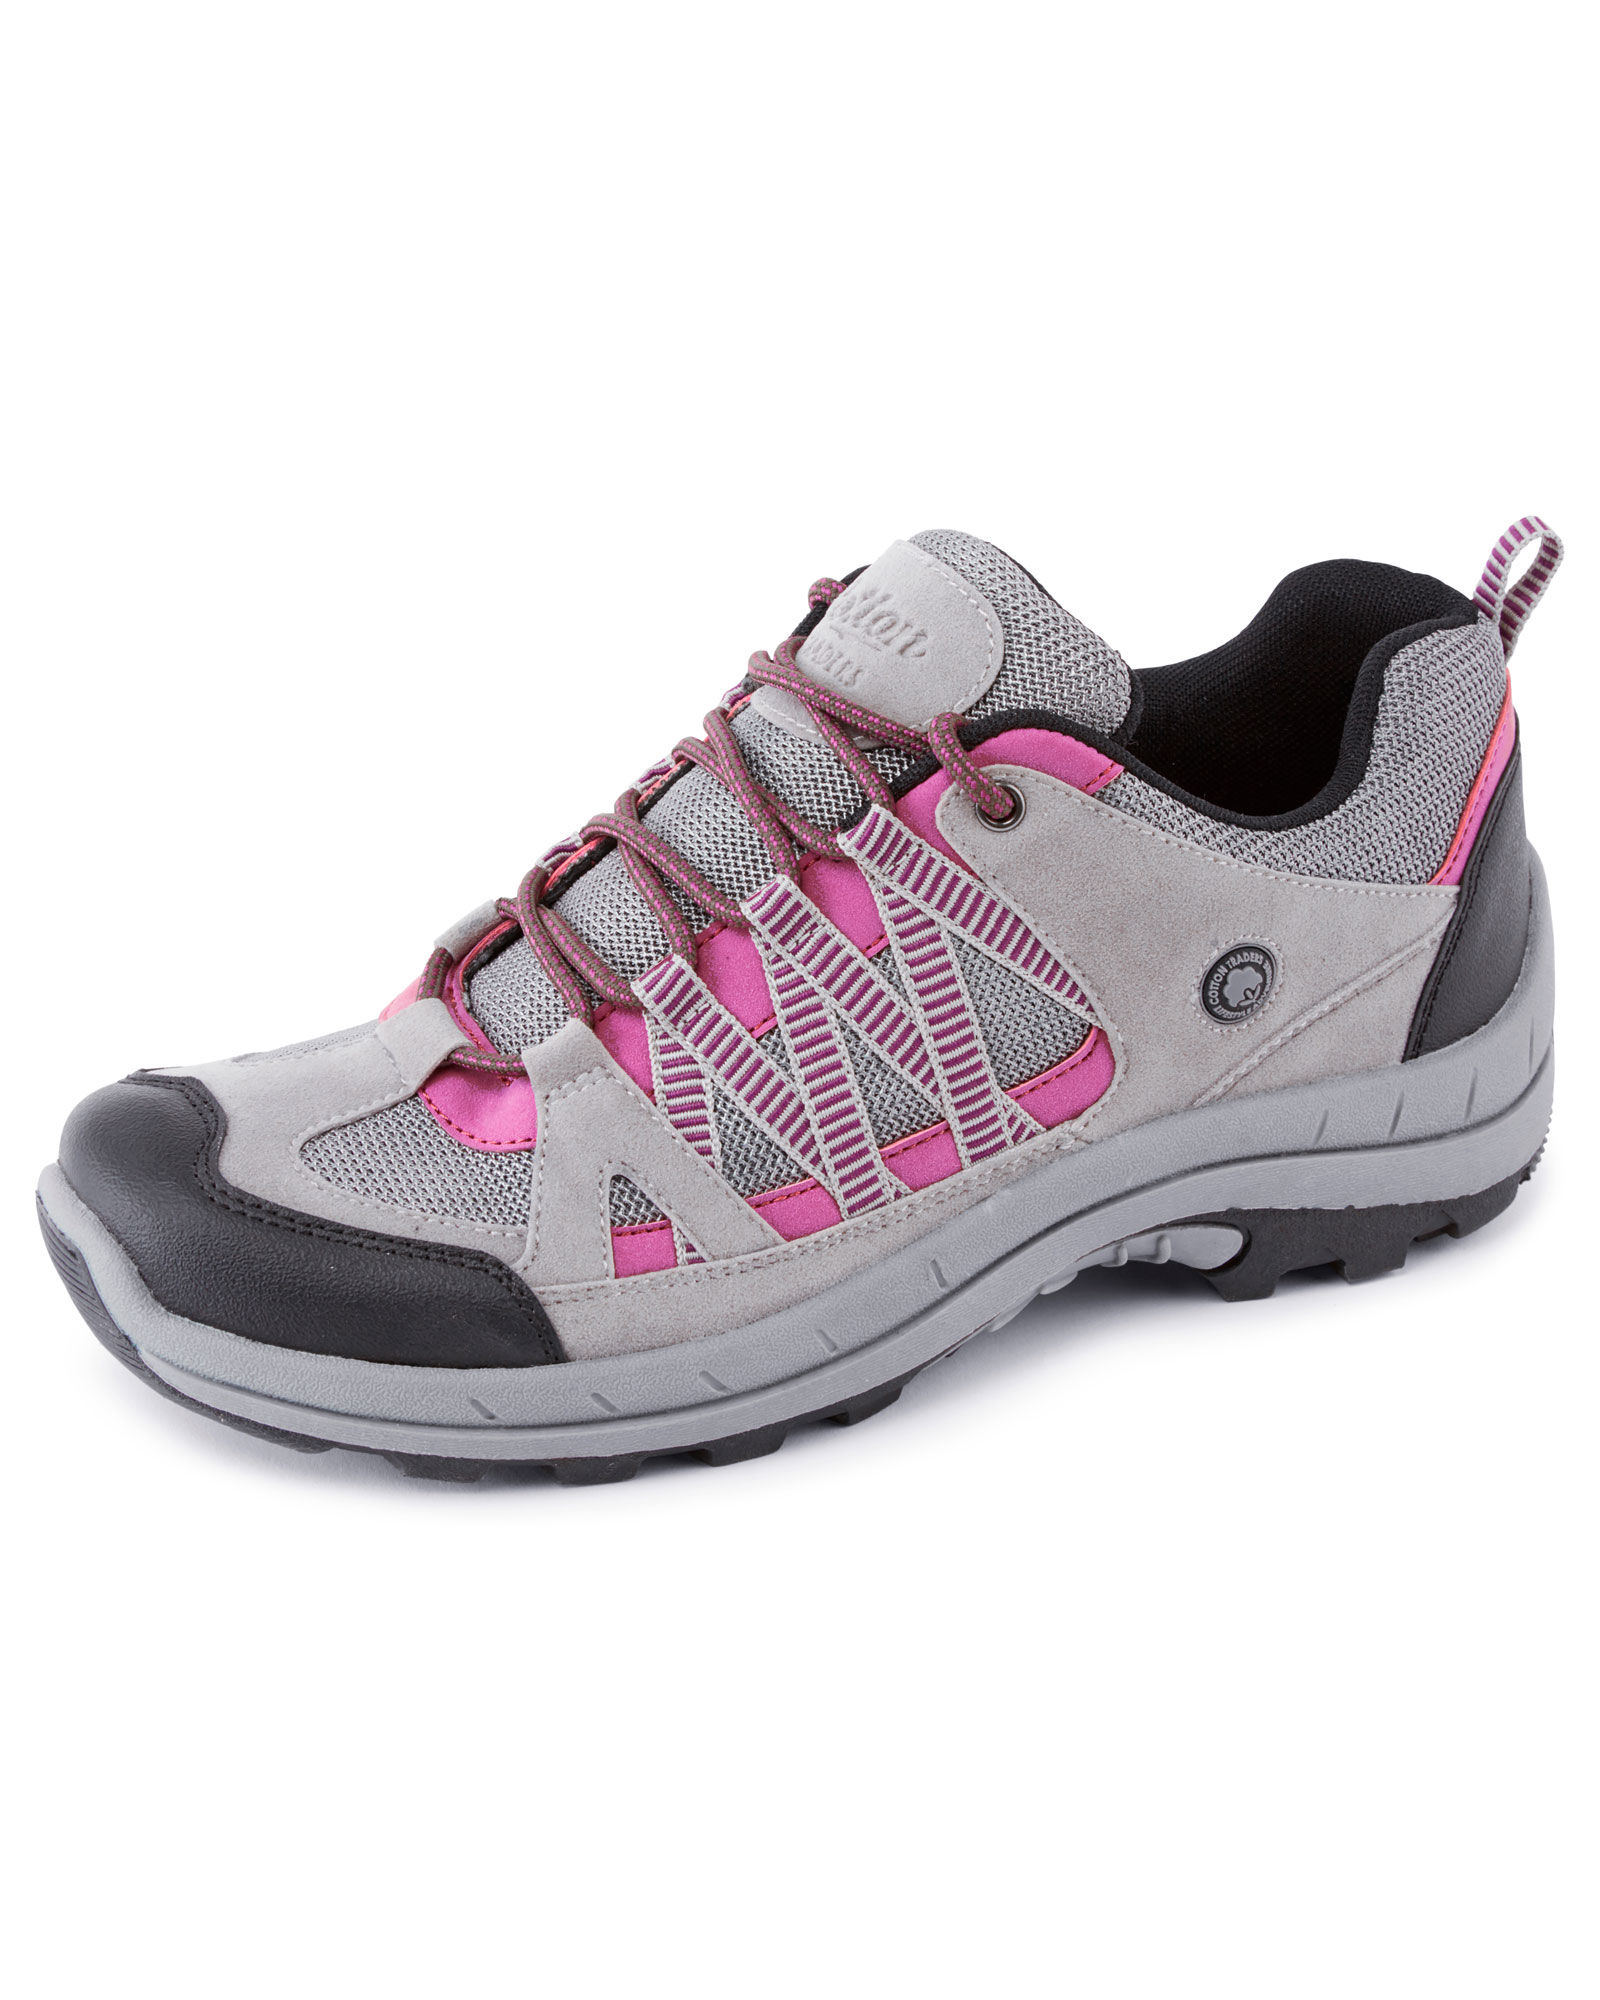 cotton traders ladies walking boots